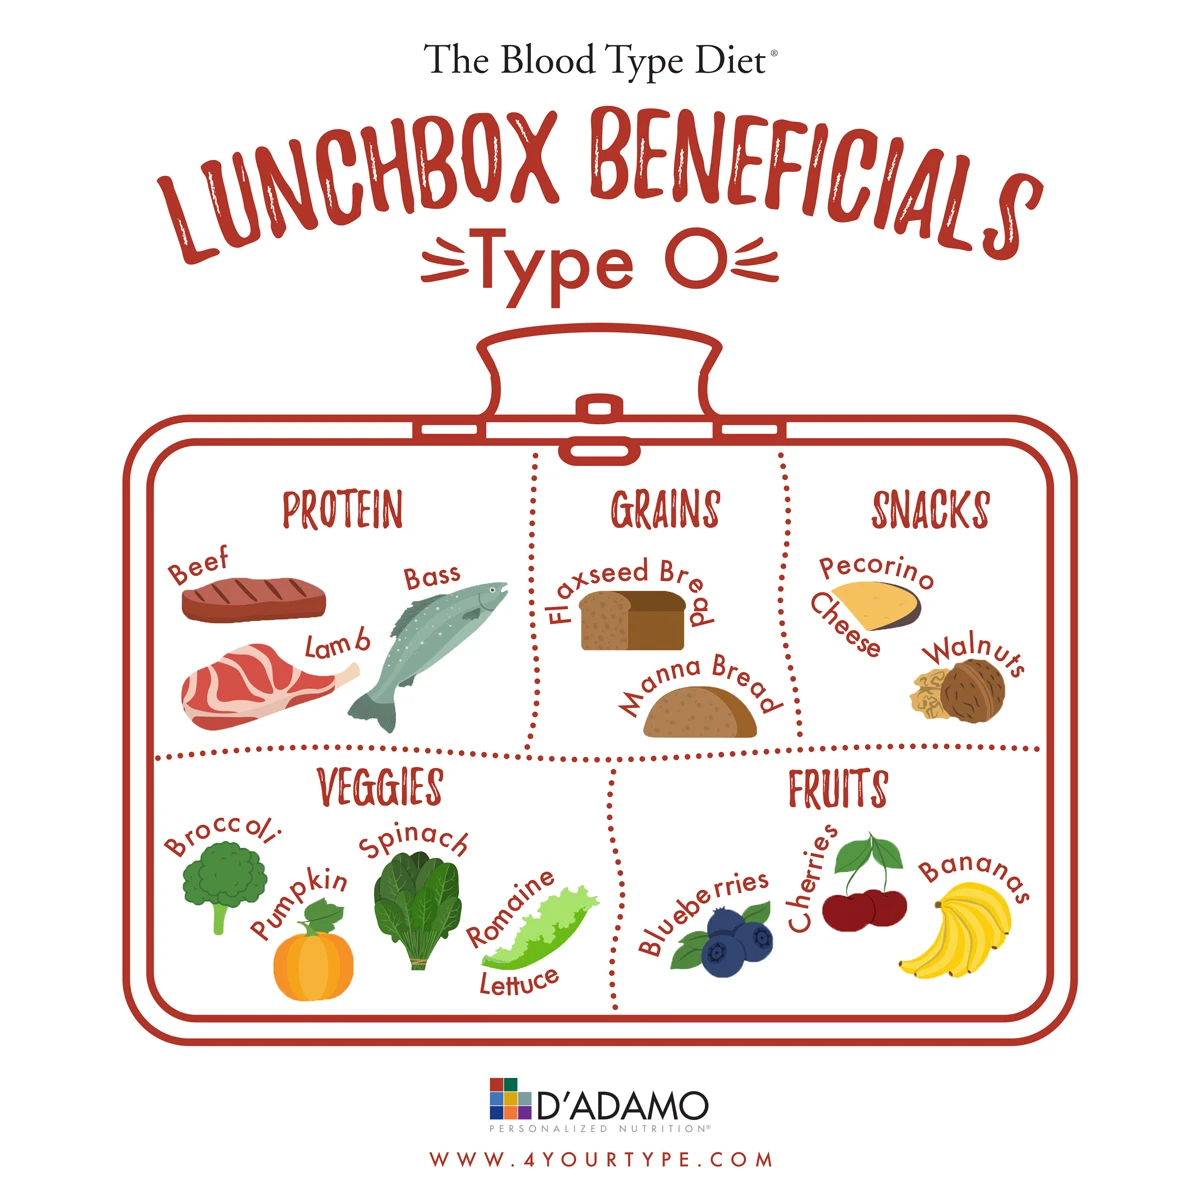 Lunchbox Beneficials Blood Type O